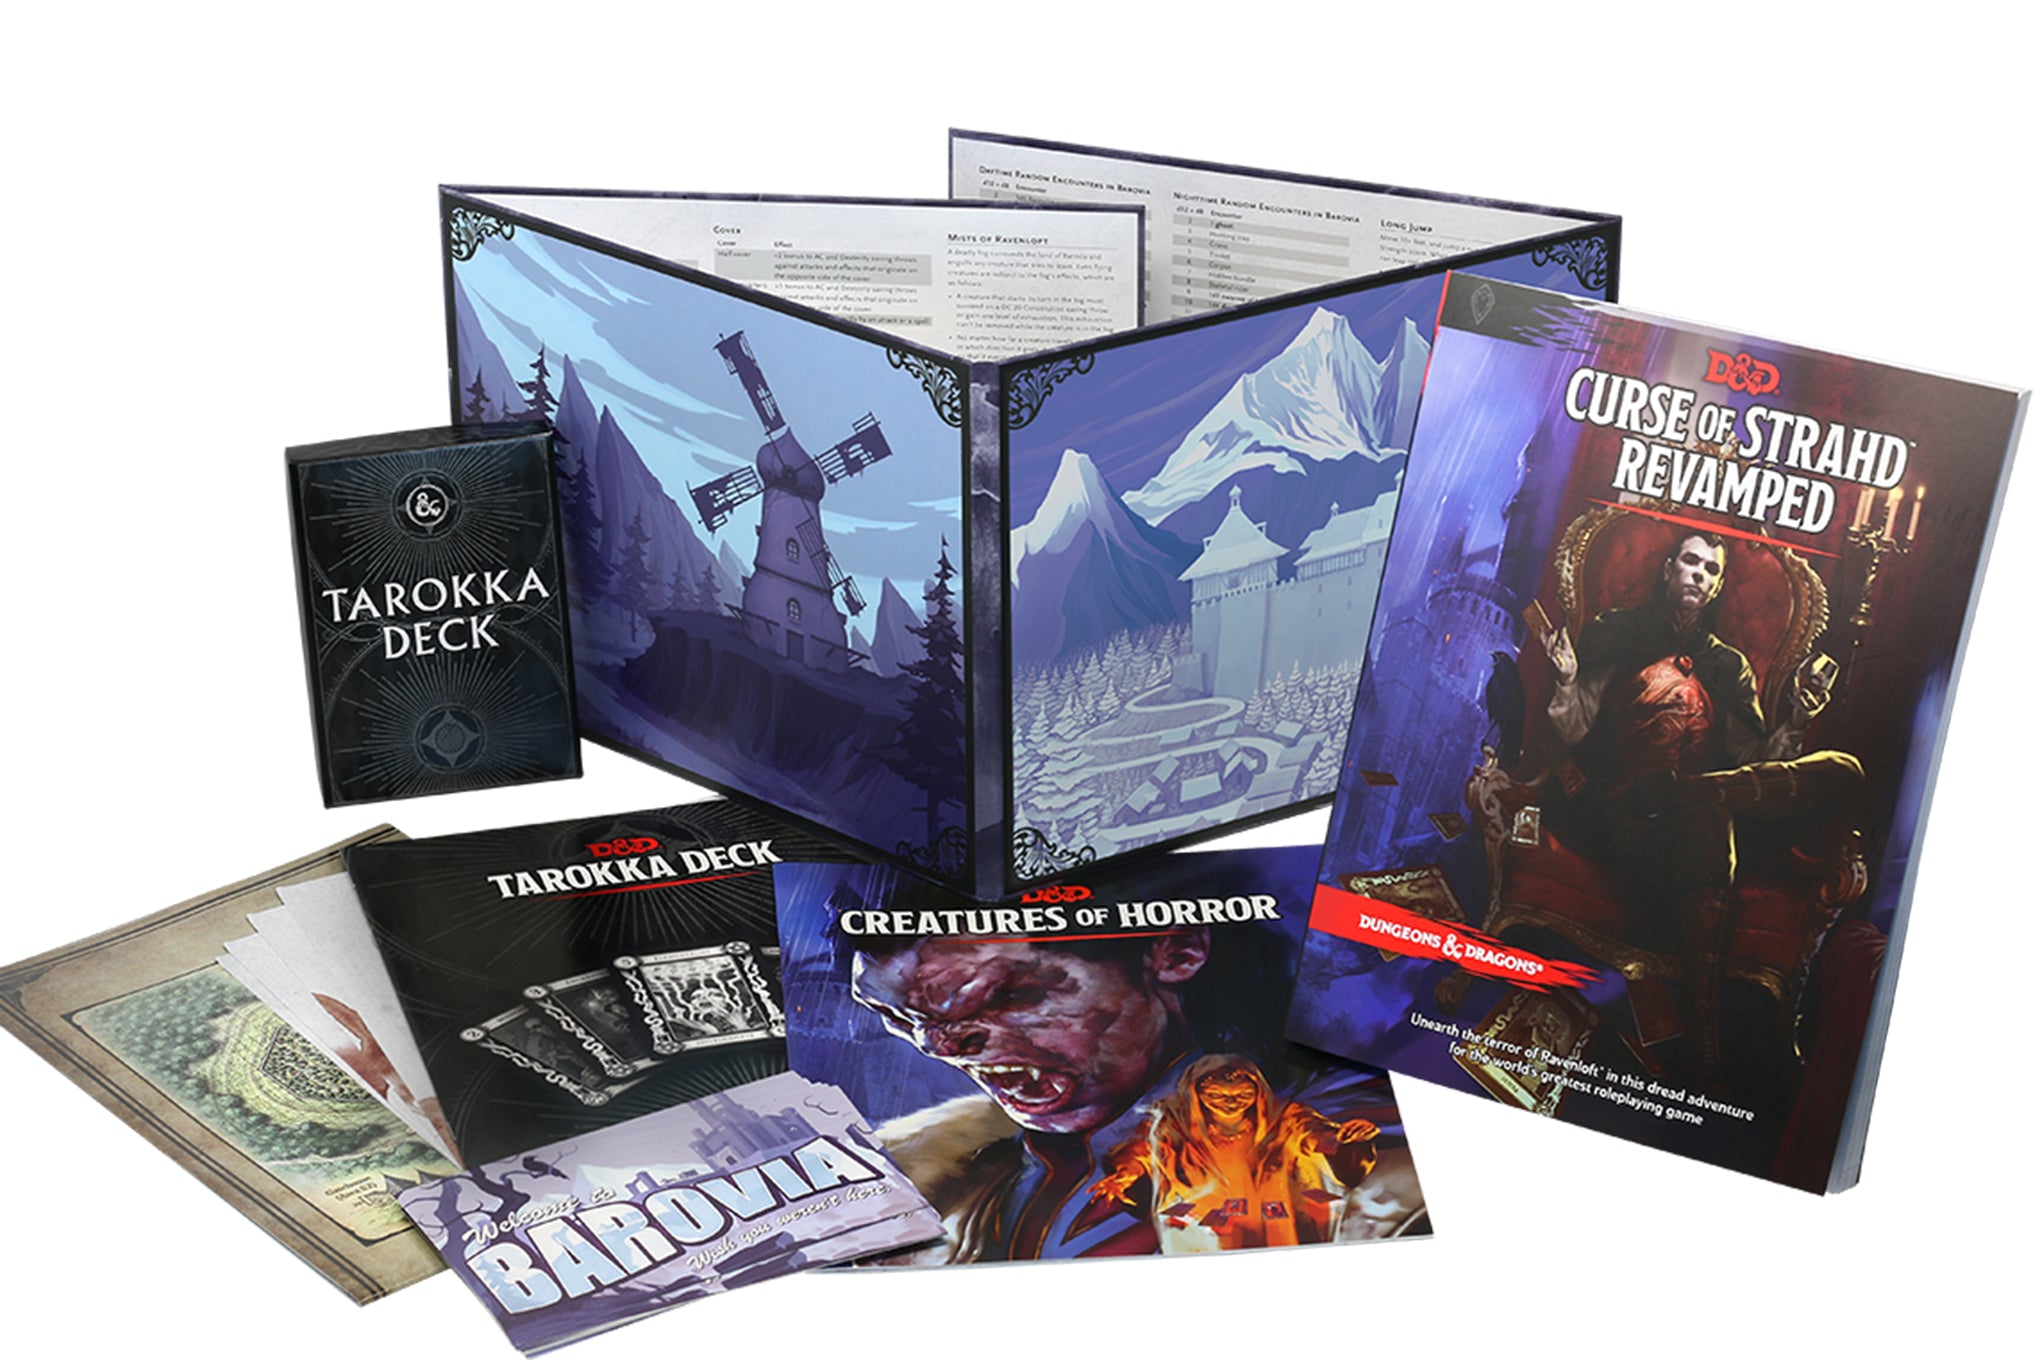 Picture of the contents of the Curse of Strahd Revamped box